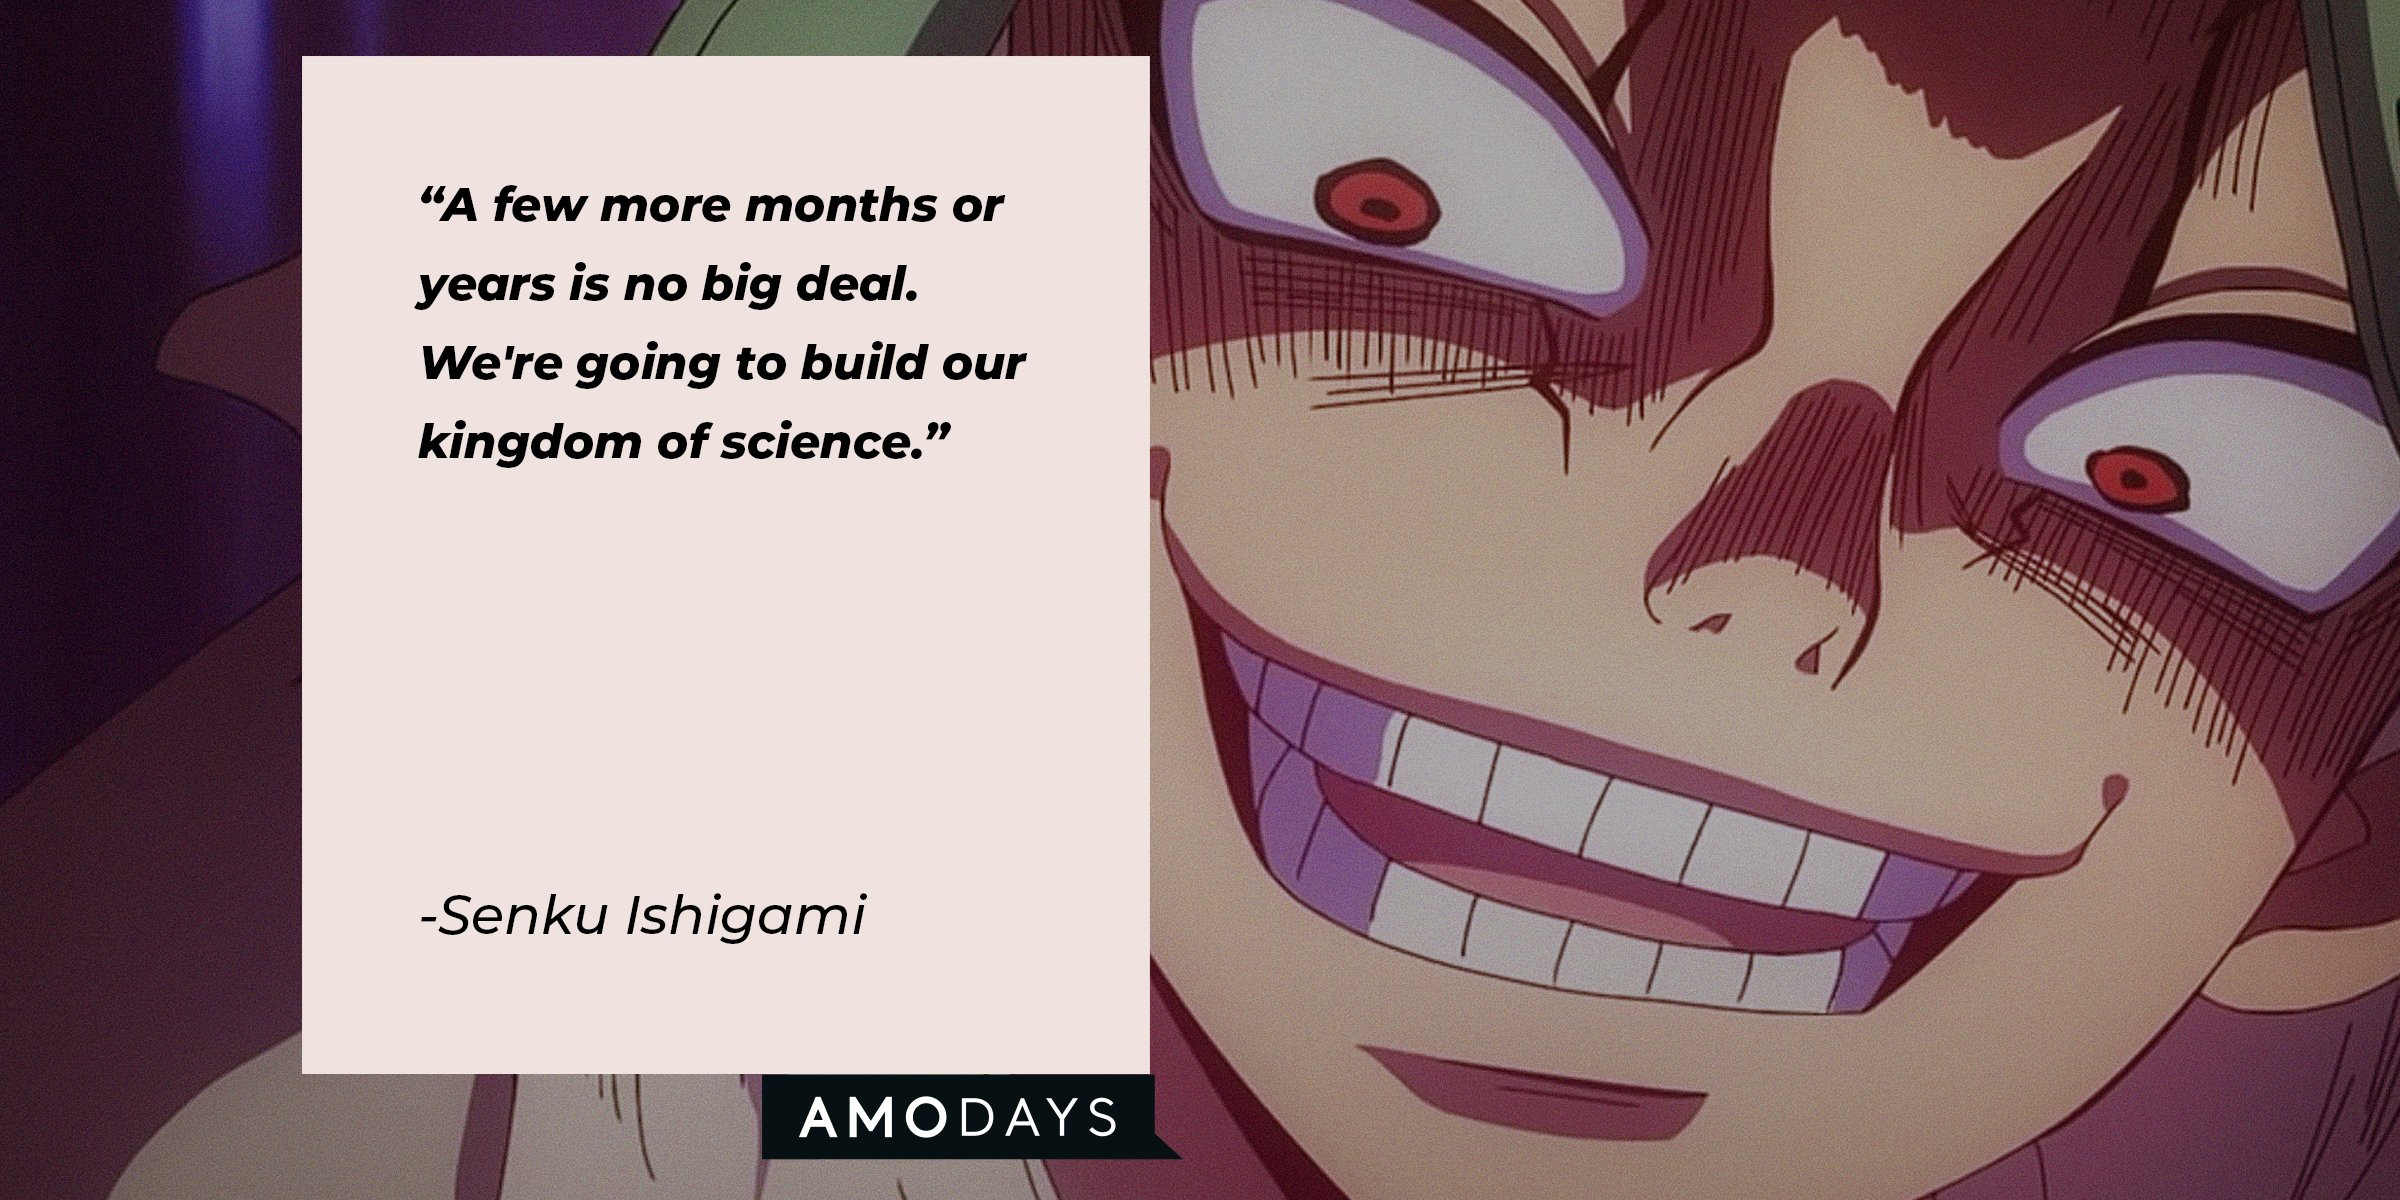 Source: youtube.com/Crunchyroll Collection | A picture of Senku Ishigamii with a quote by him that reads, “A few more months or years is no big deal. we're going to build our kingdom of science."